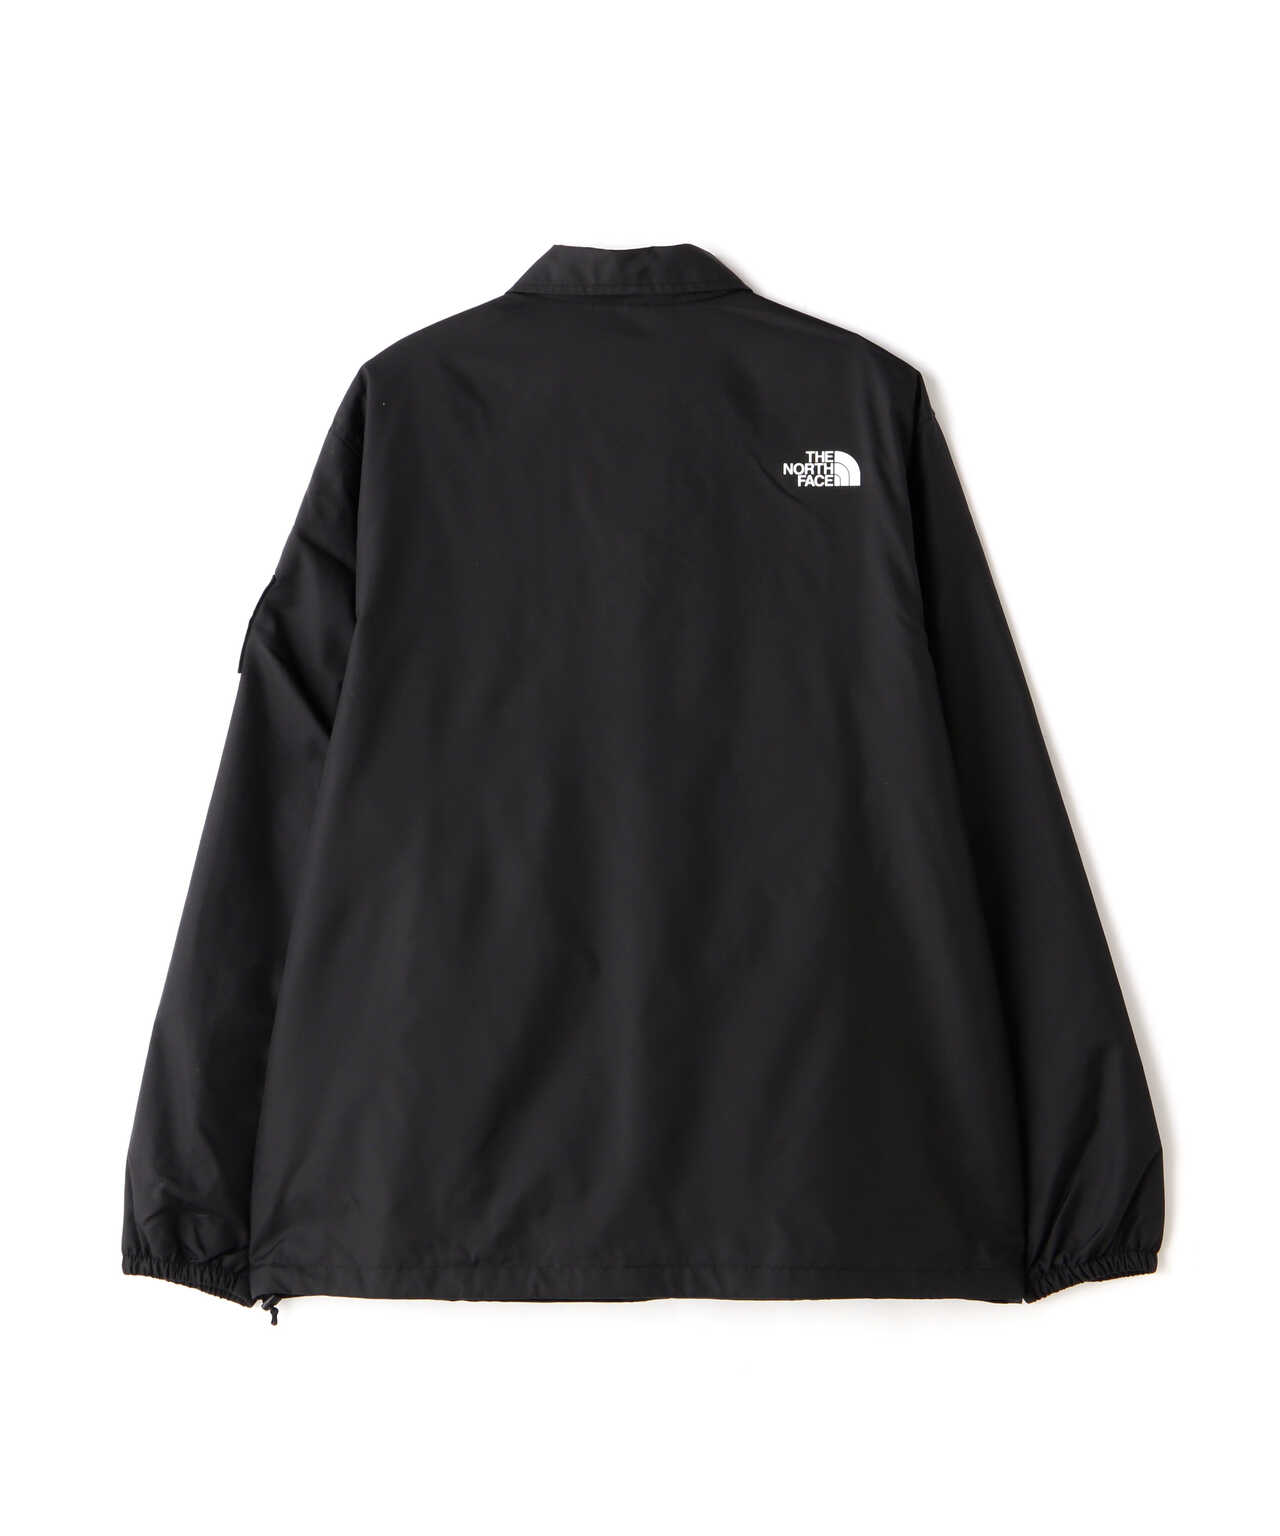 THE NORTH FACE/ The Coach Jacket NP72130 | B'2nd ( ビーセカンド